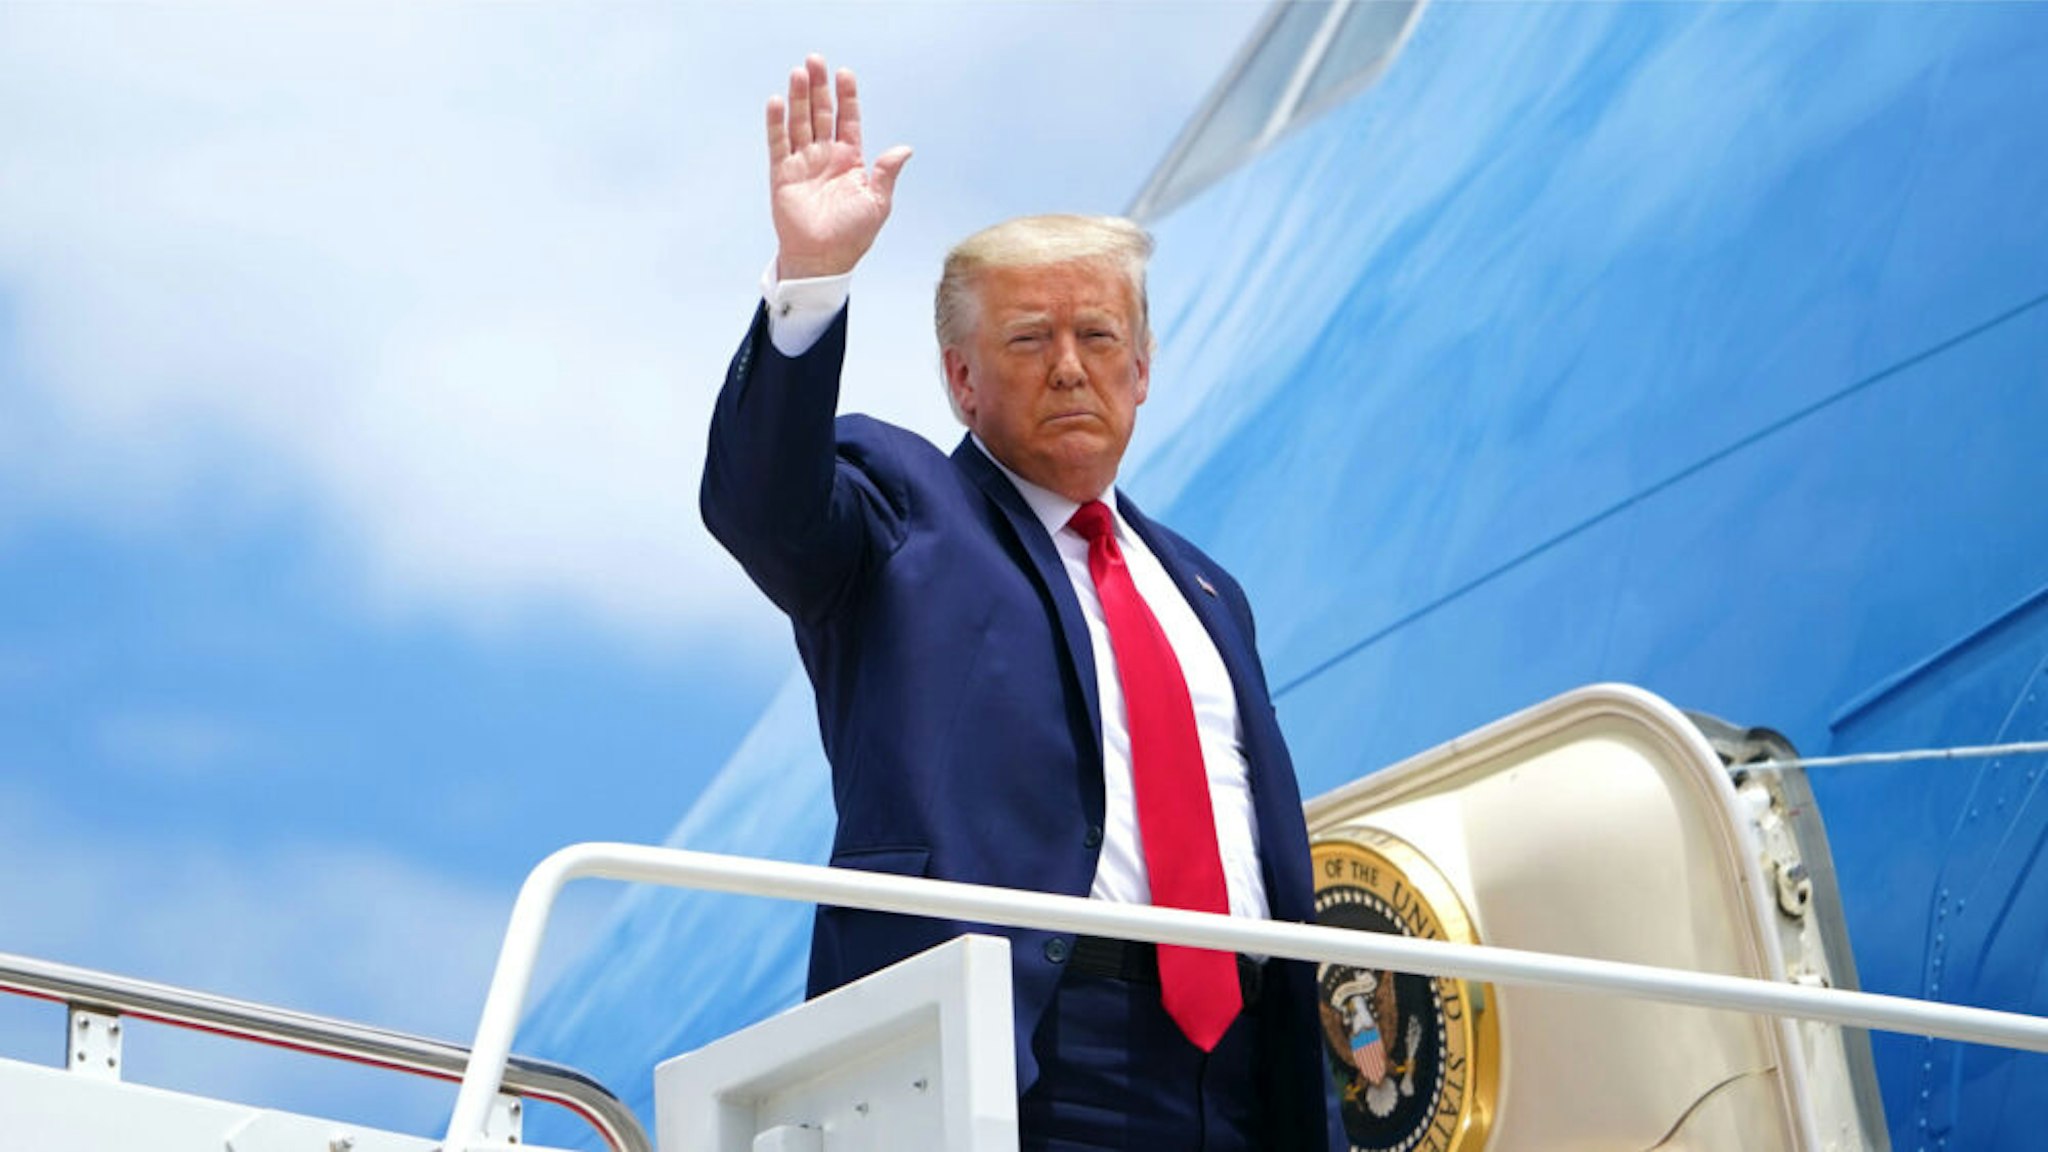 US President Donald Trump boards Air Force One as he departs from Joint Base Andrews in Maryland on May 30, 2020. - Trump travels to Kennedy Space Center in Florida to watch the launch of the manned SpaceX Demo-2 mission to the International Space Station.